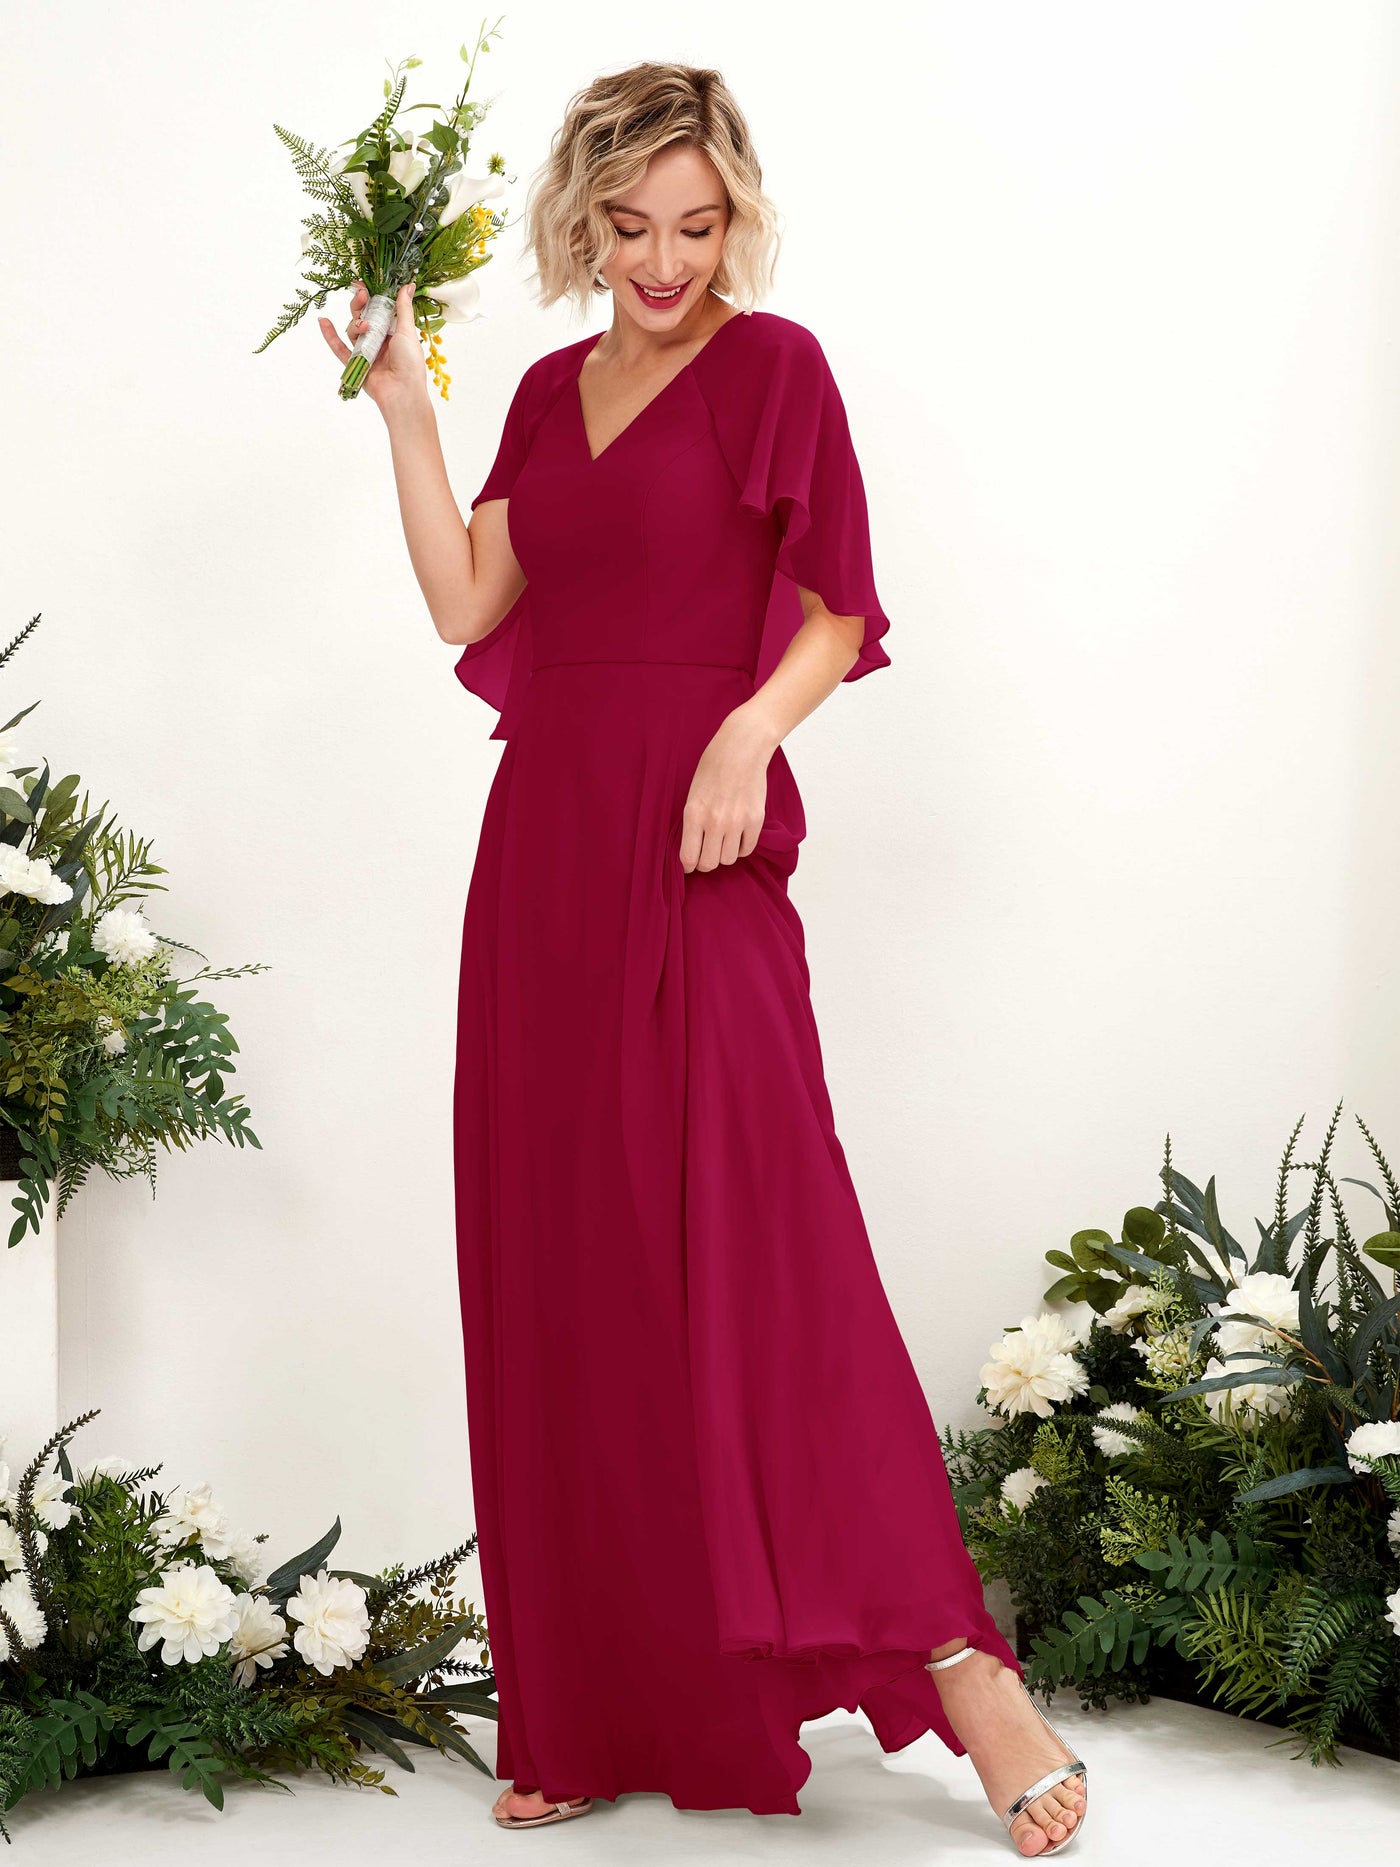 Jester Red Bridesmaid Dresses Bridesmaid Dress A-line Chiffon V-neck Full Length Short Sleeves Wedding Party Dress (81224441)#color_jester-red